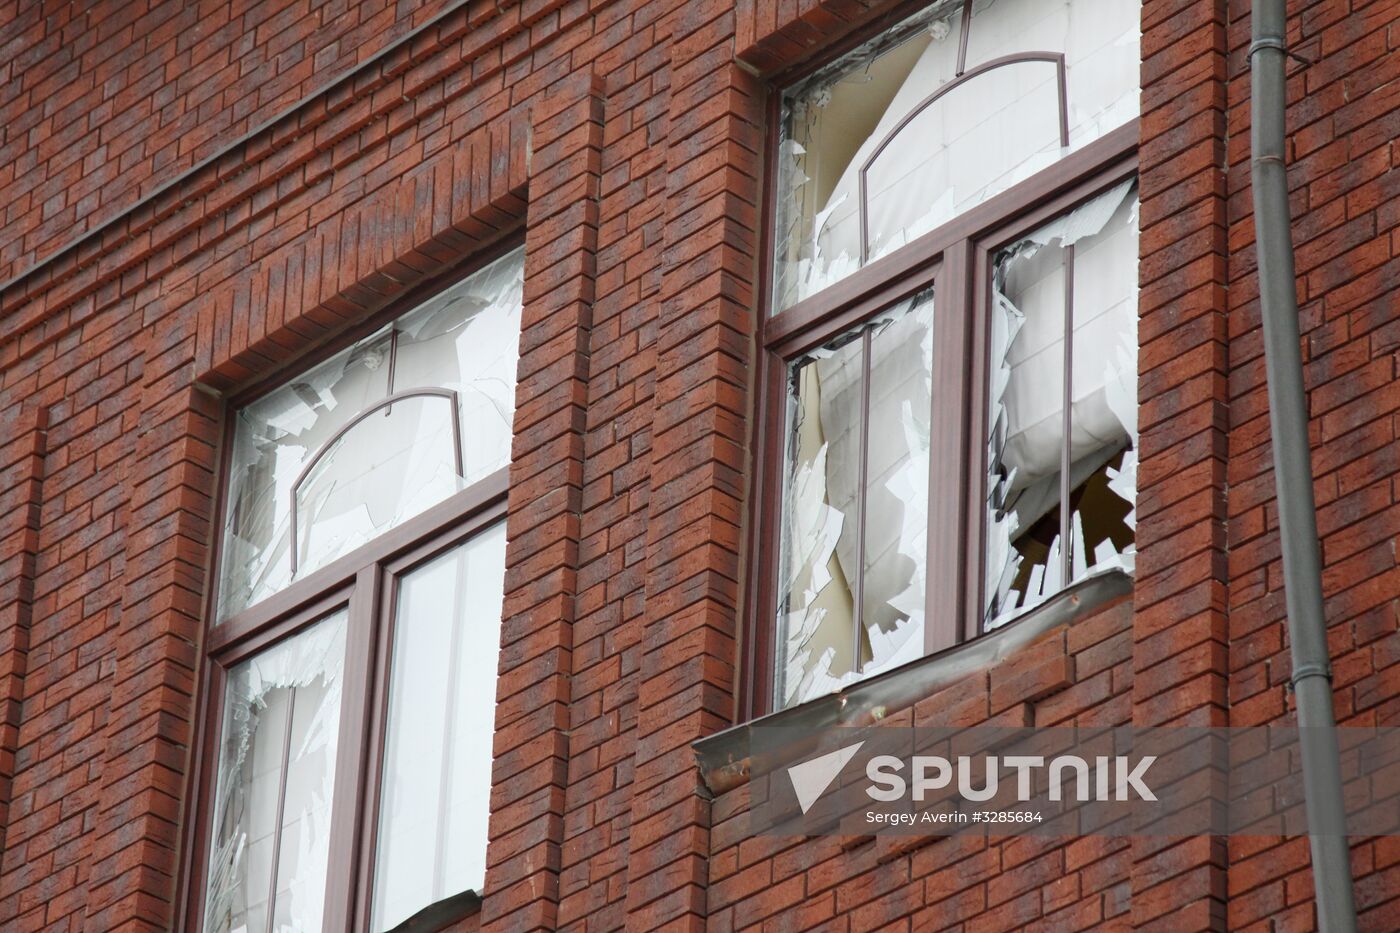 Aftermath of grenade launcher attack on DPR Defense Ministry in Donetsk